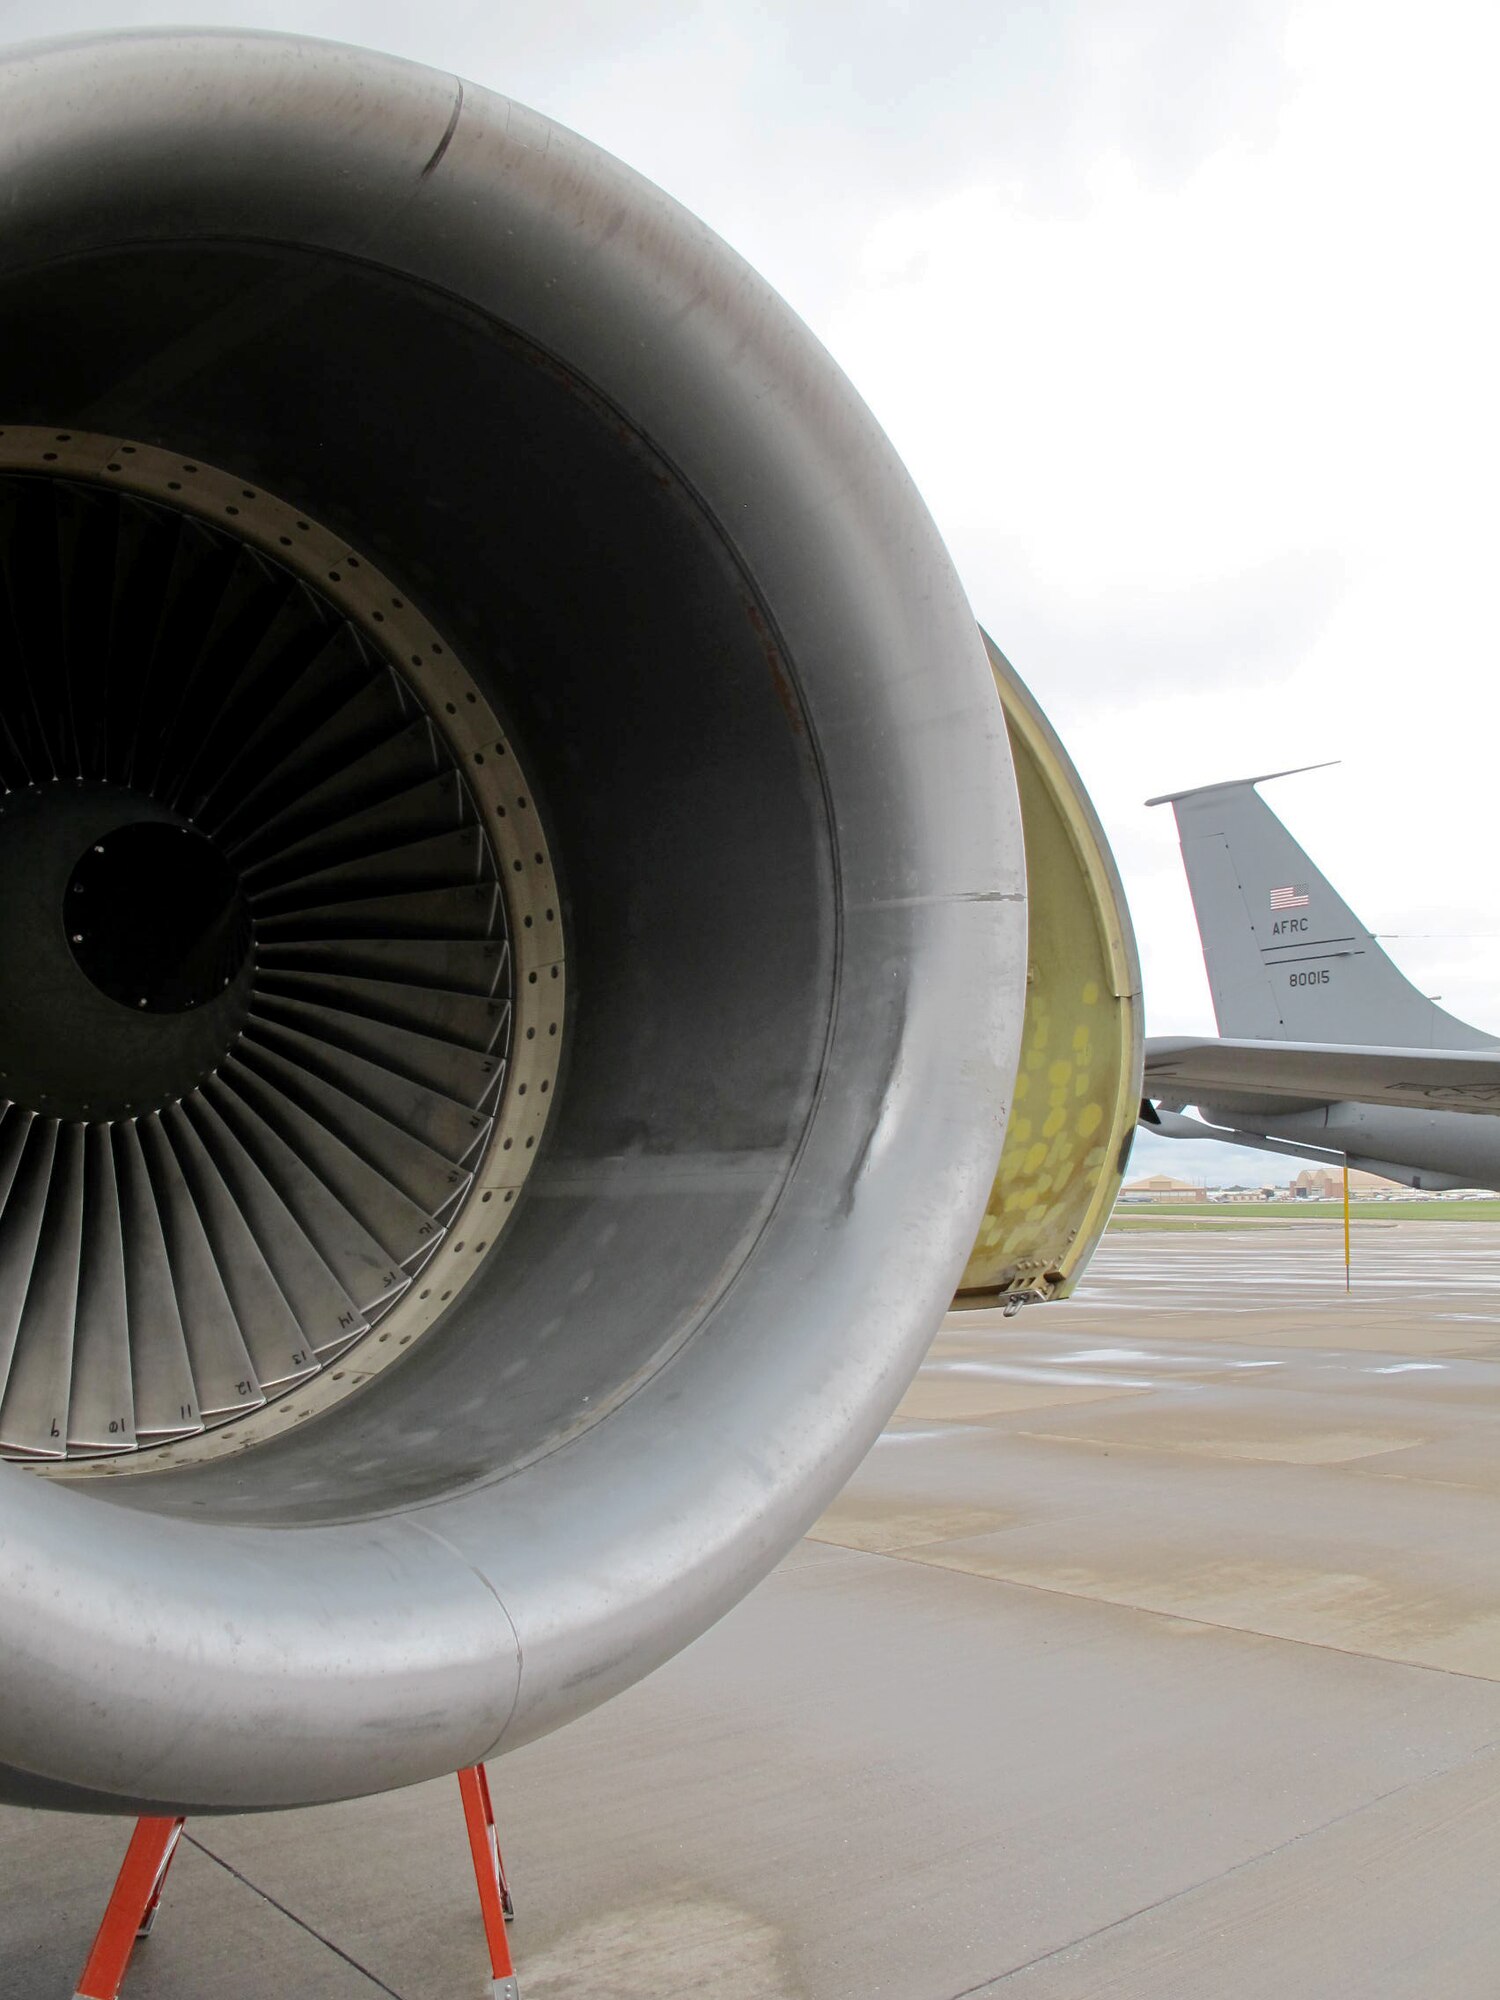 The damage from a bird strike can be seen on the cowling of a KC-135 engine on the 507th Air Refueling Wing flightline at Tinker Air Force Base, Oklahoma, Sept. 22, 2020. (U.S. Air Force photo by Tech. Sgt. Kurt Weisel)